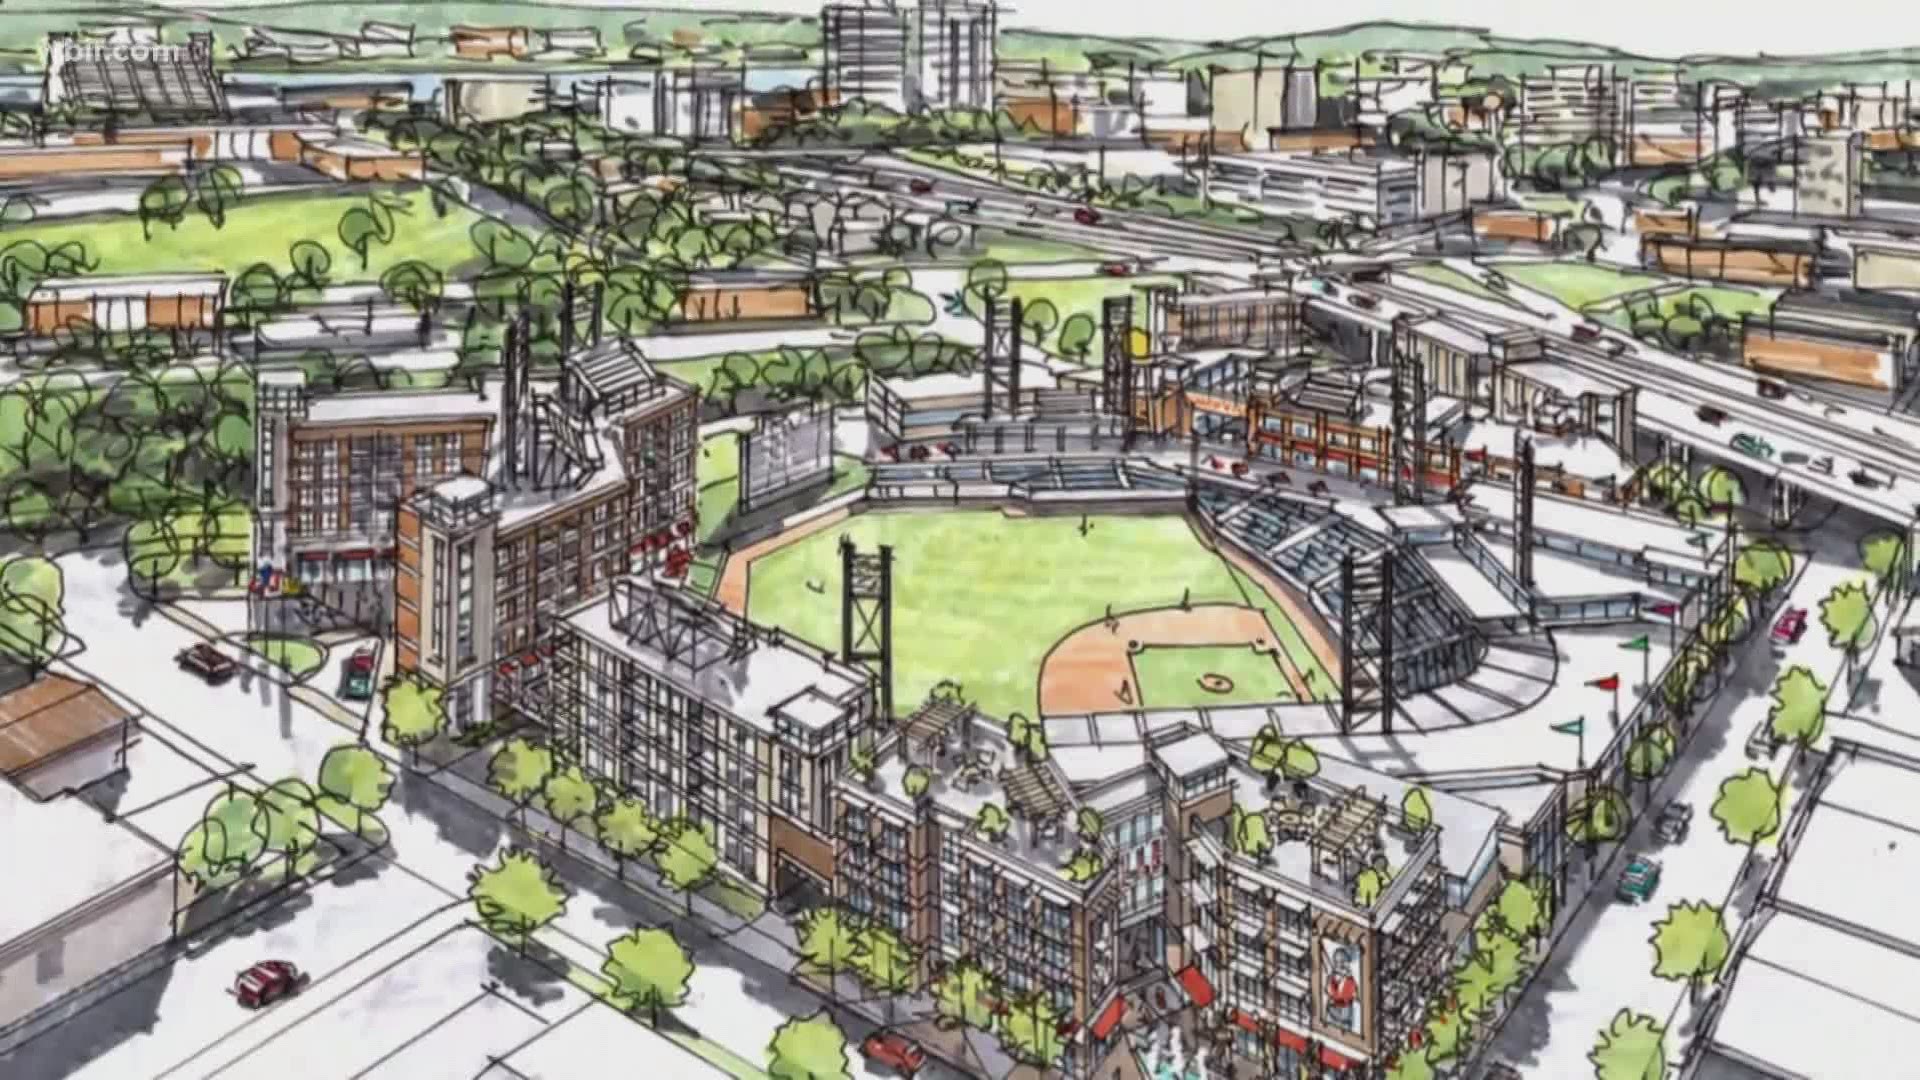 Downtown Knoxville could play ball in just over two years if the proposal to build a multi-sport stadium is approved.